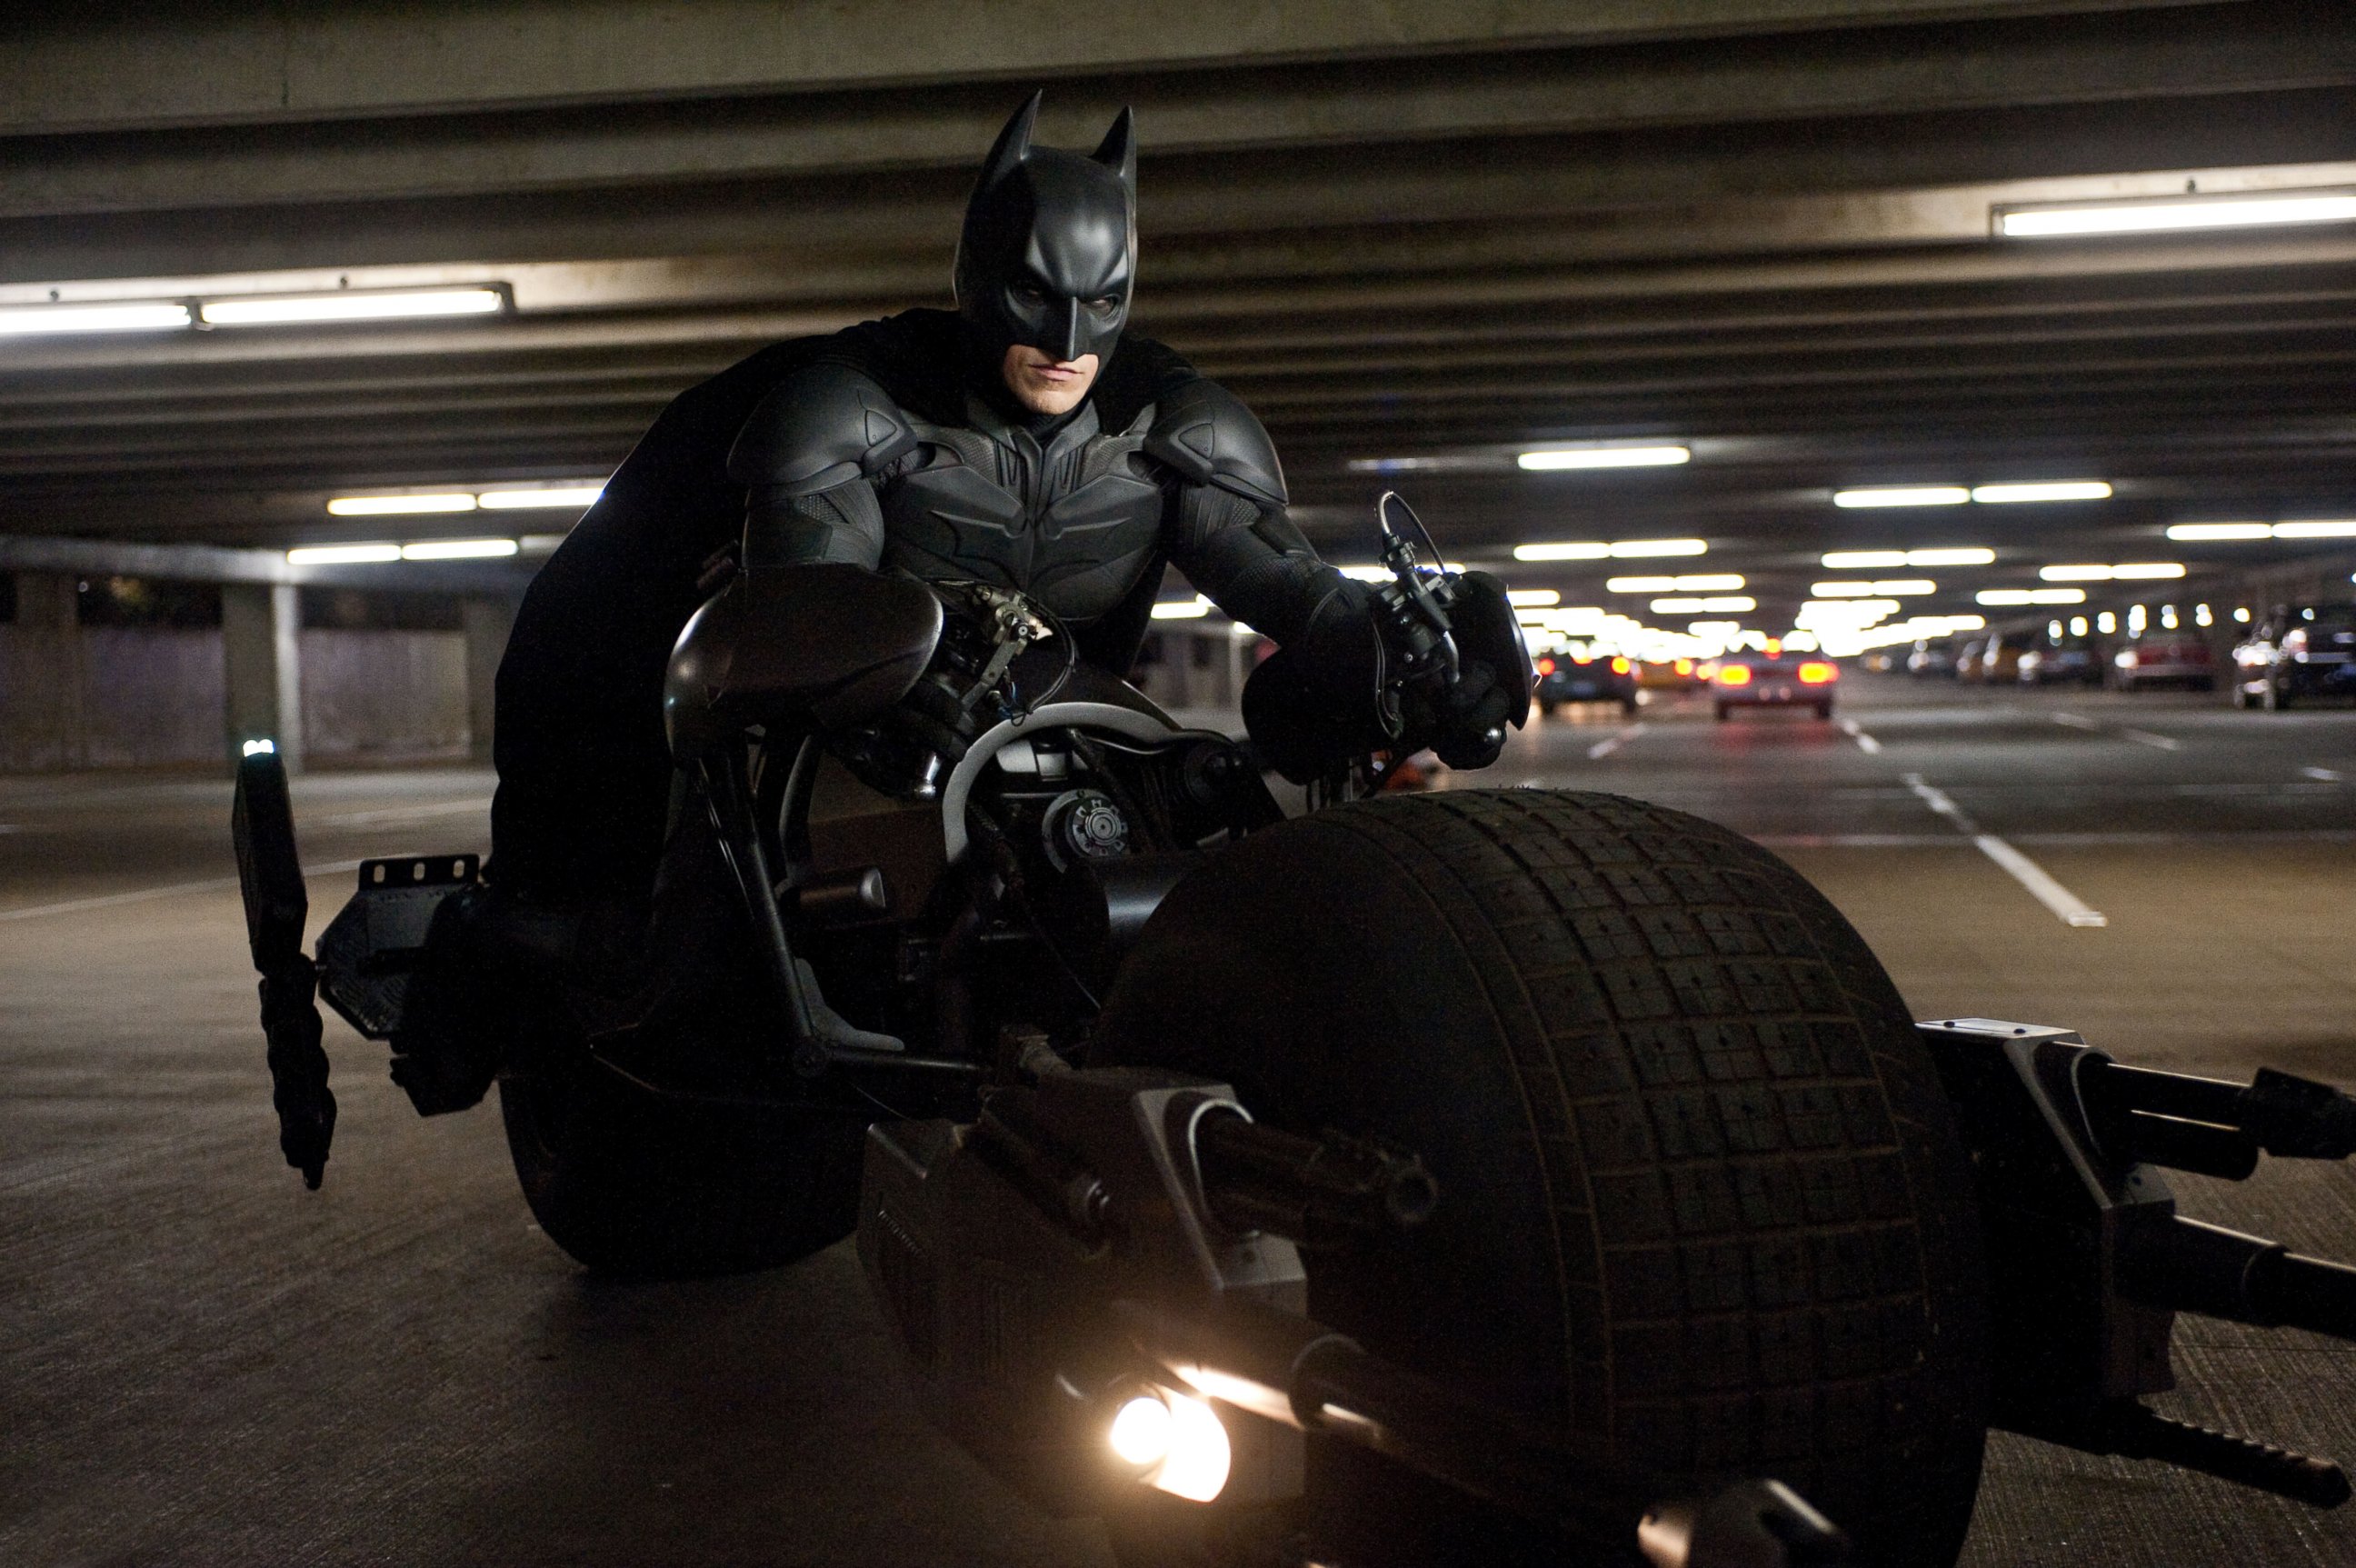 PHOTO: Christian Bale is seen here as Batman in "The Dark Knight Rises."